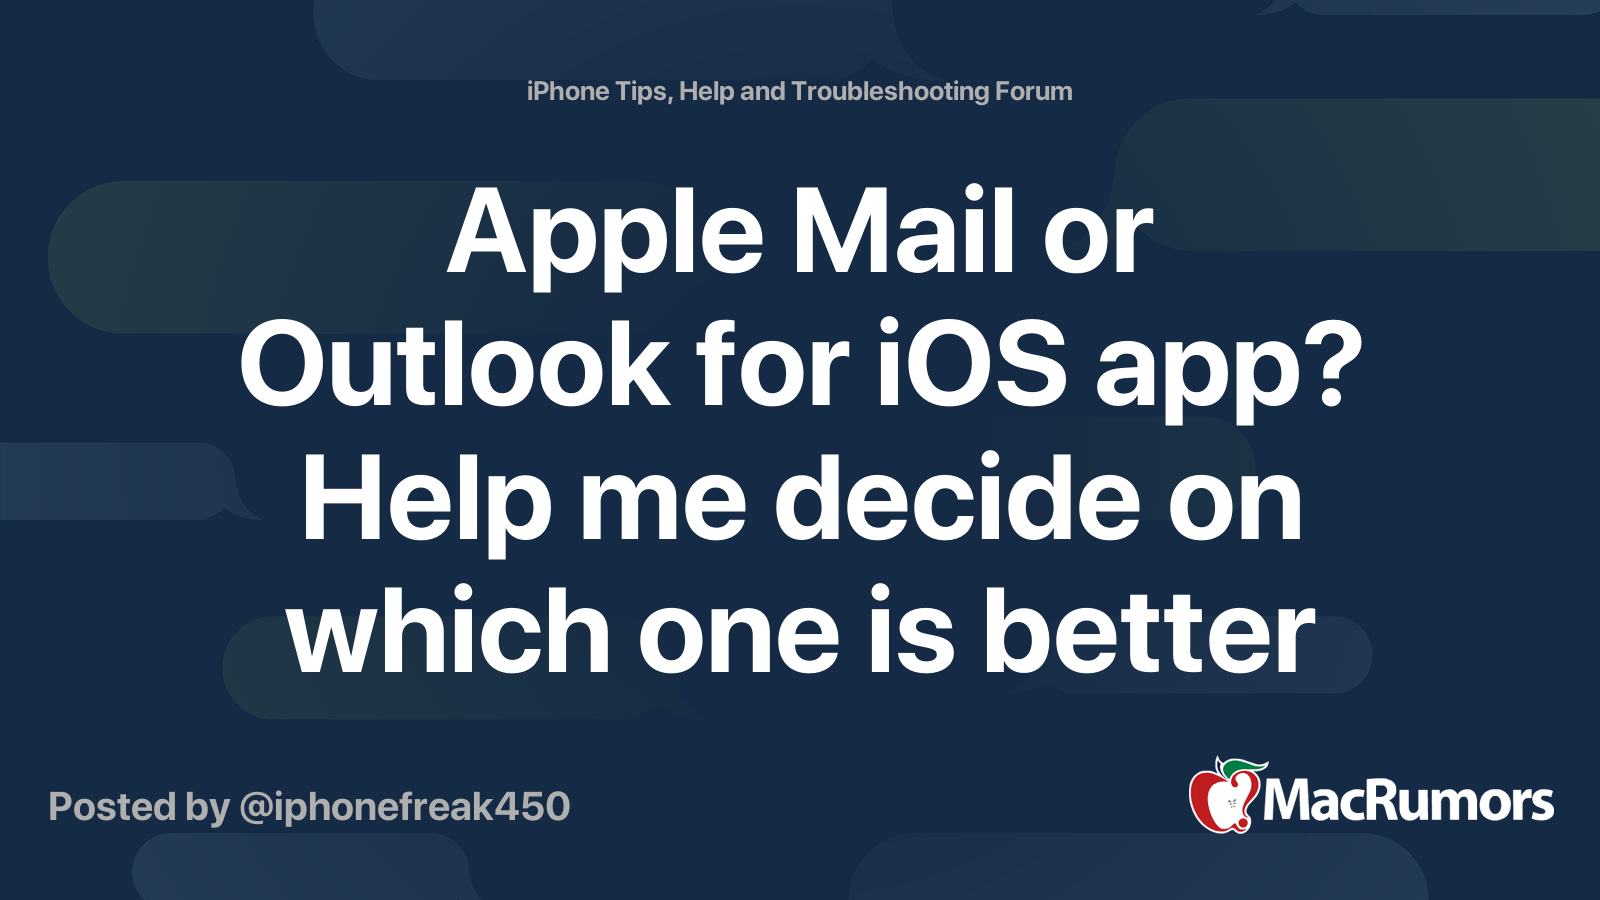 Outlook for iOS 8 vs Apple Mail for iOS